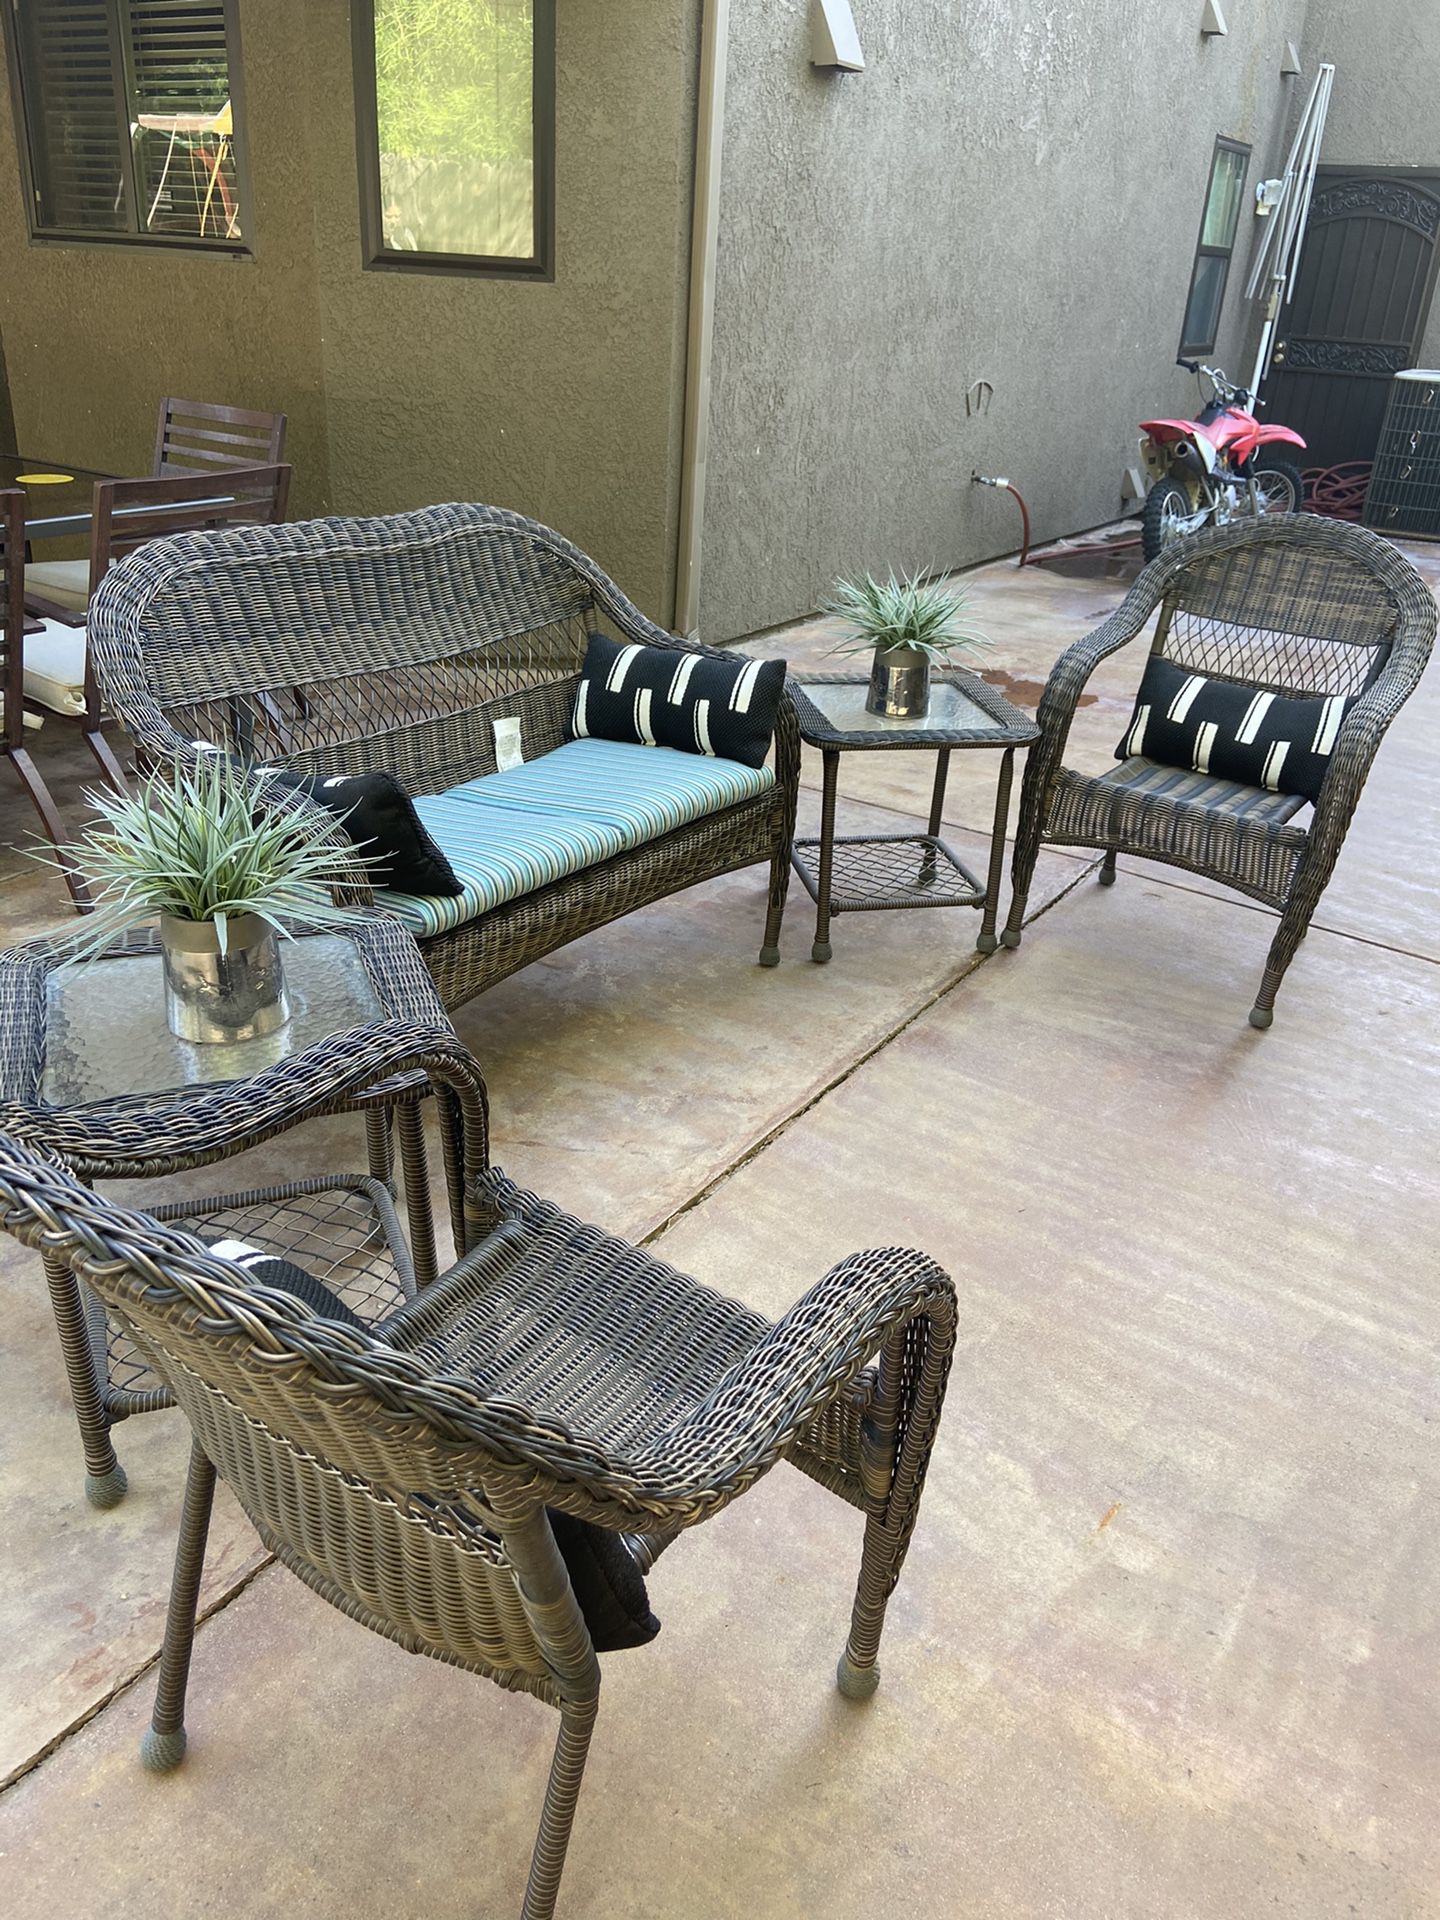 Beautiful five piece patio setin excellent condition basically brand new 325 firm on the price